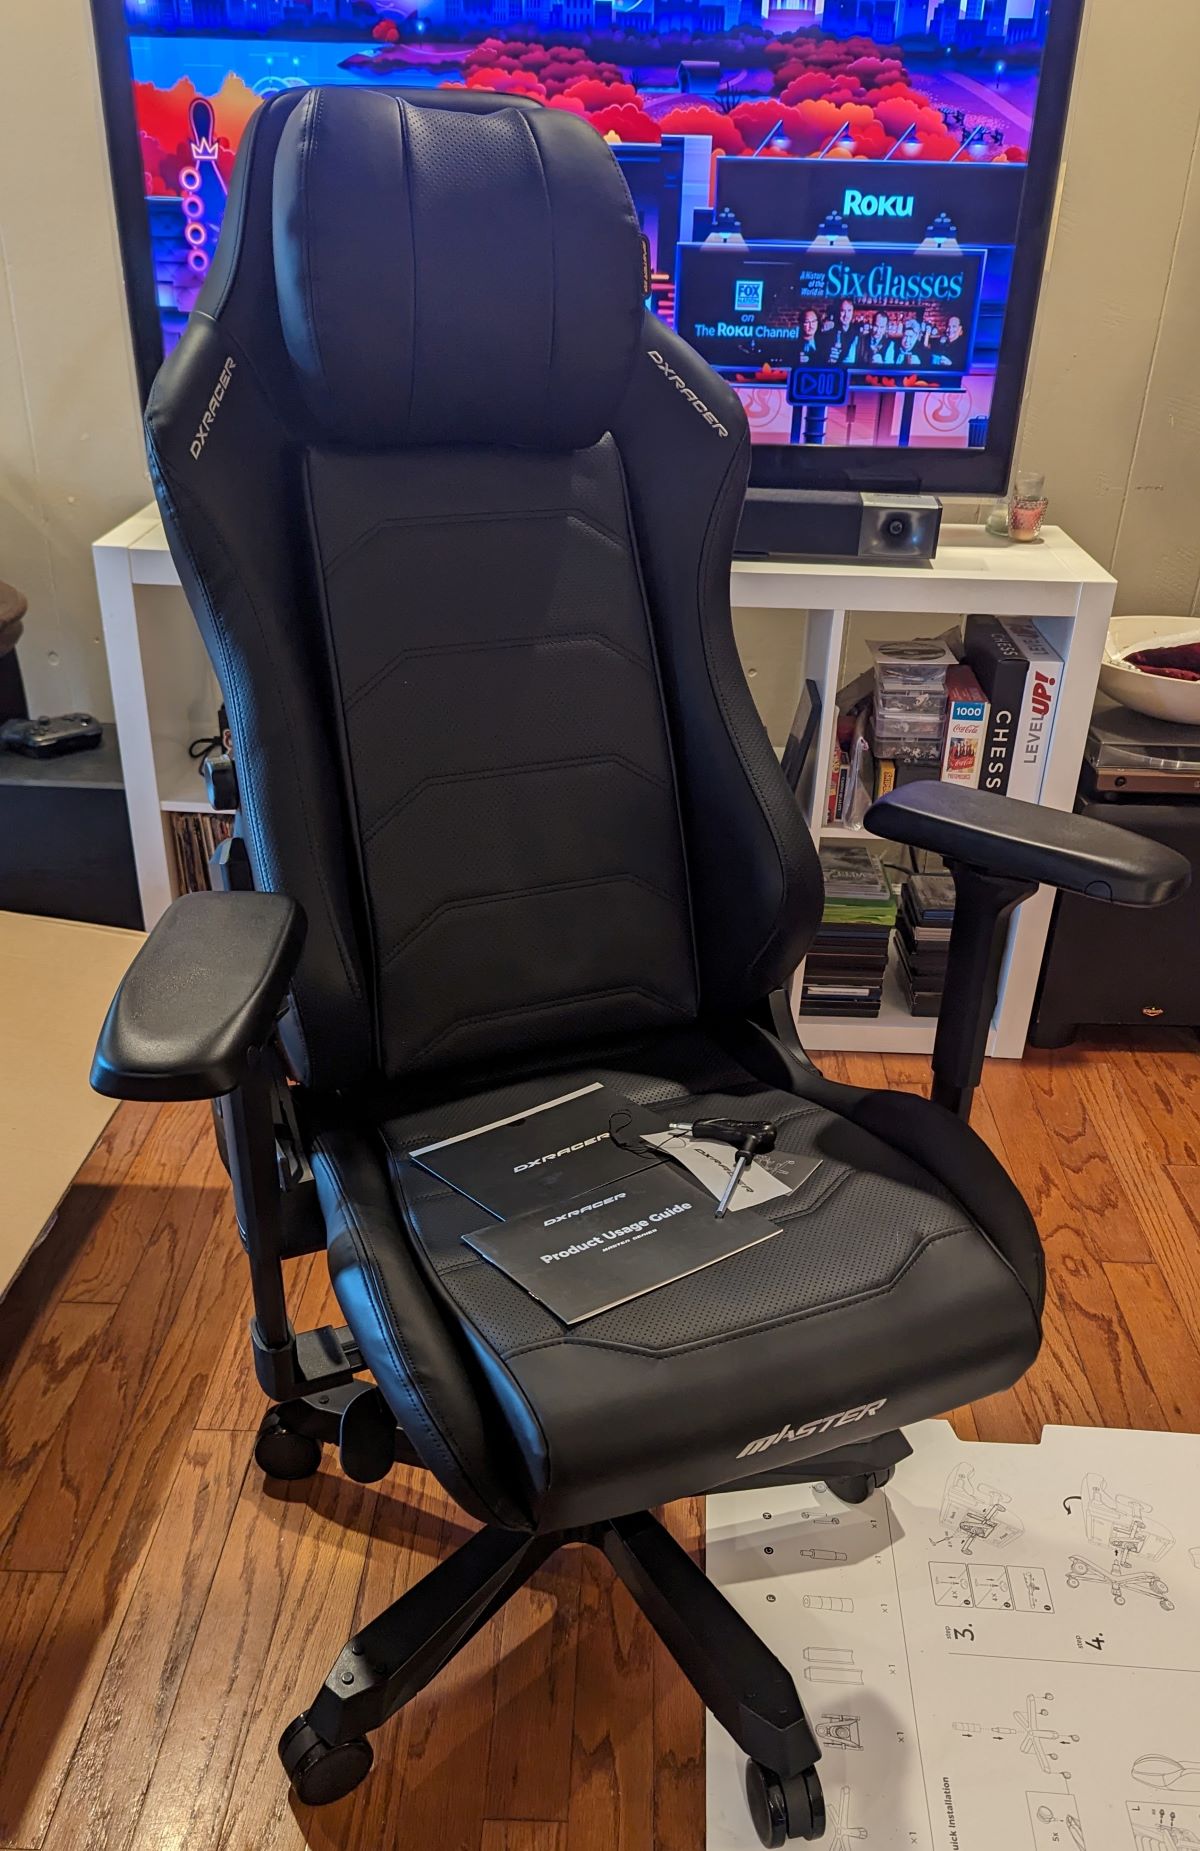 DXRacer Master series gaming chair Black XL review - The perfect perch ...